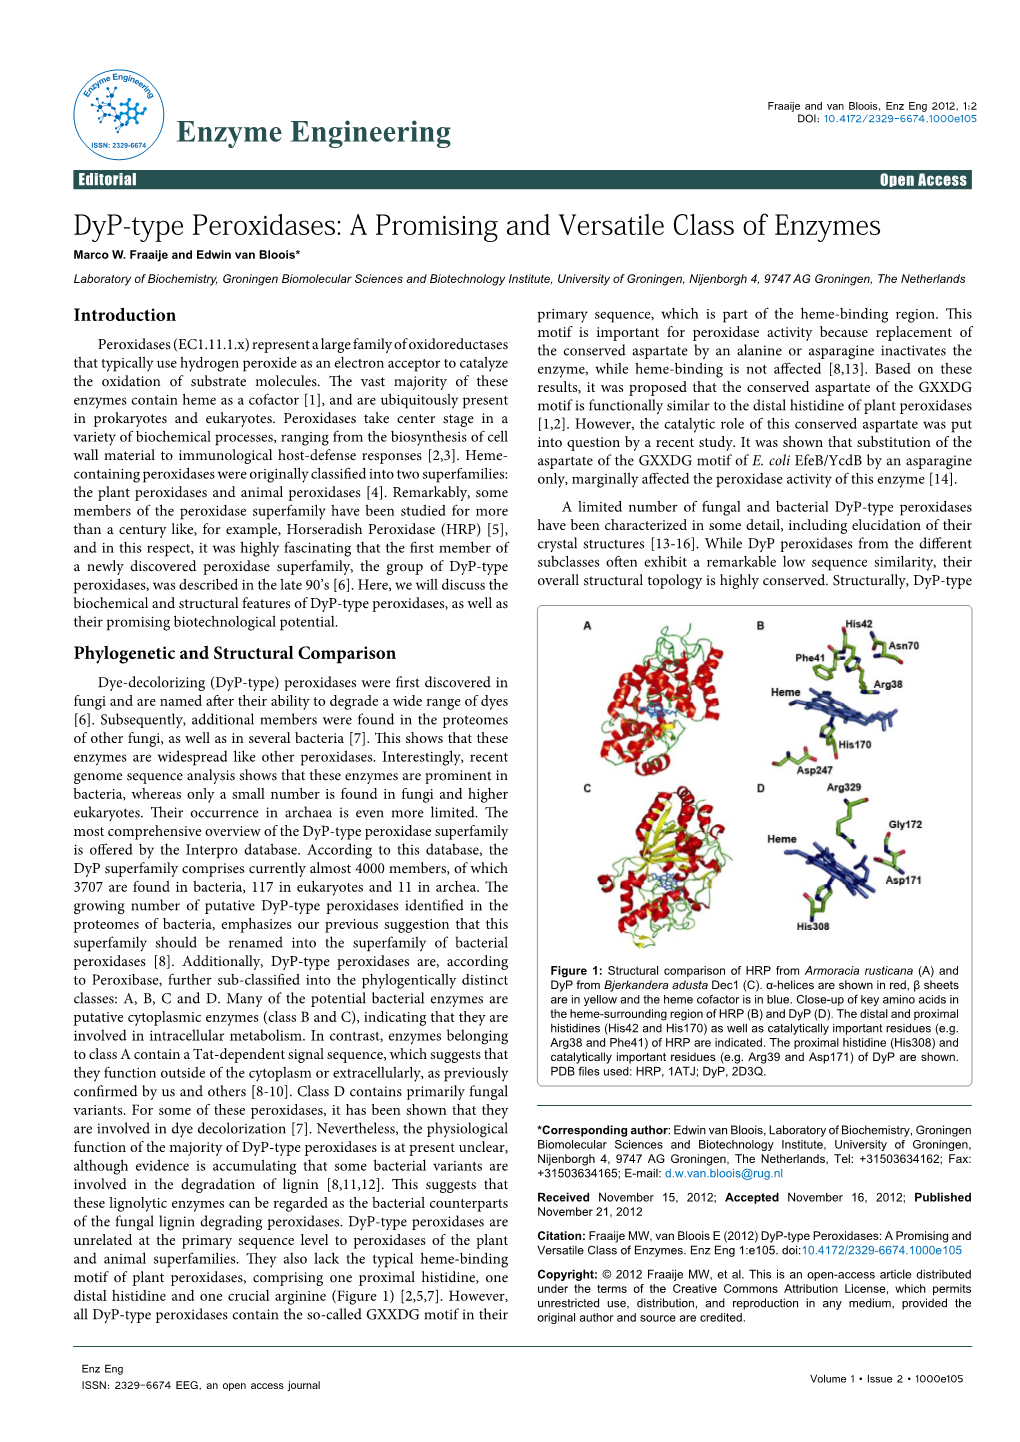 Dyp-Type Peroxidases: a Promising and Versatile Class of Enzymes Marco W